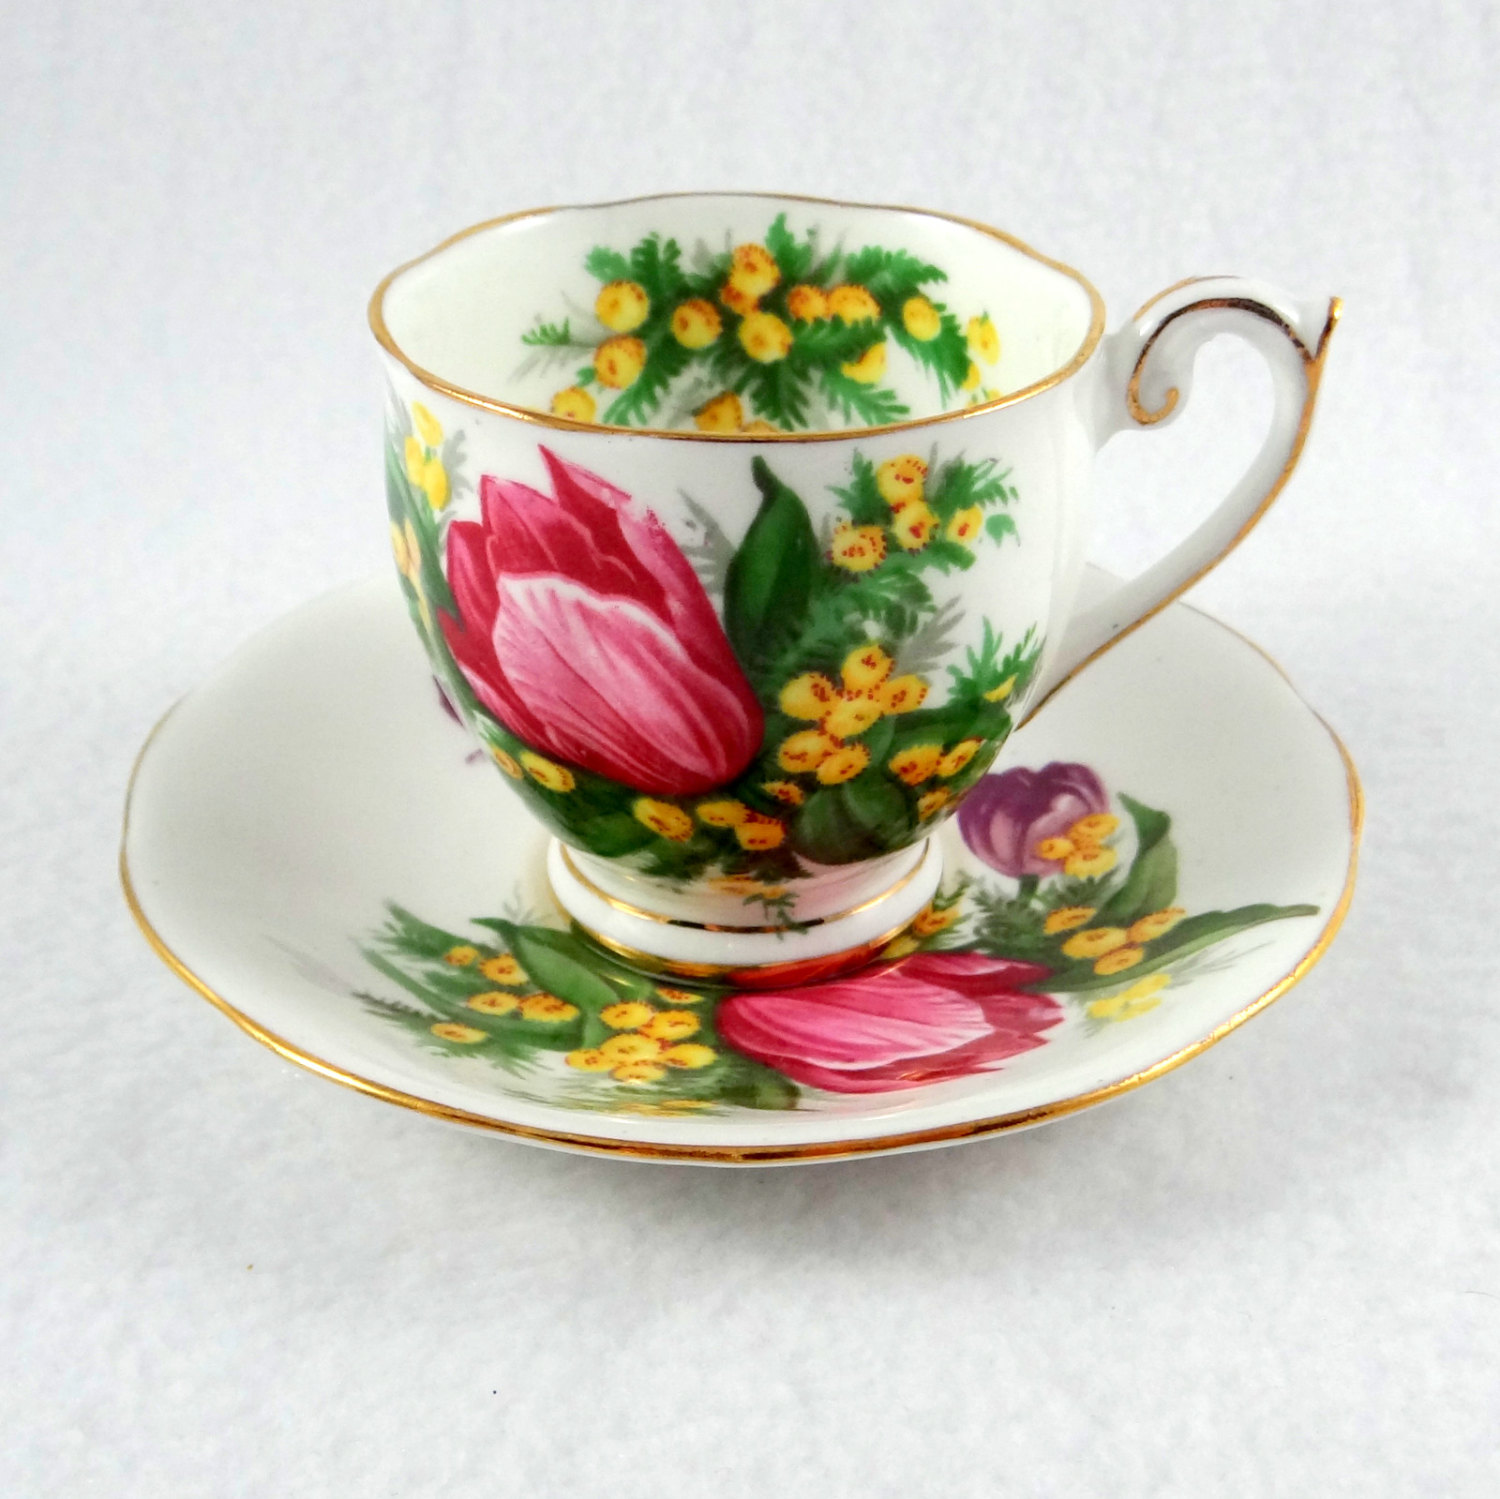 Teacup with tulip photo